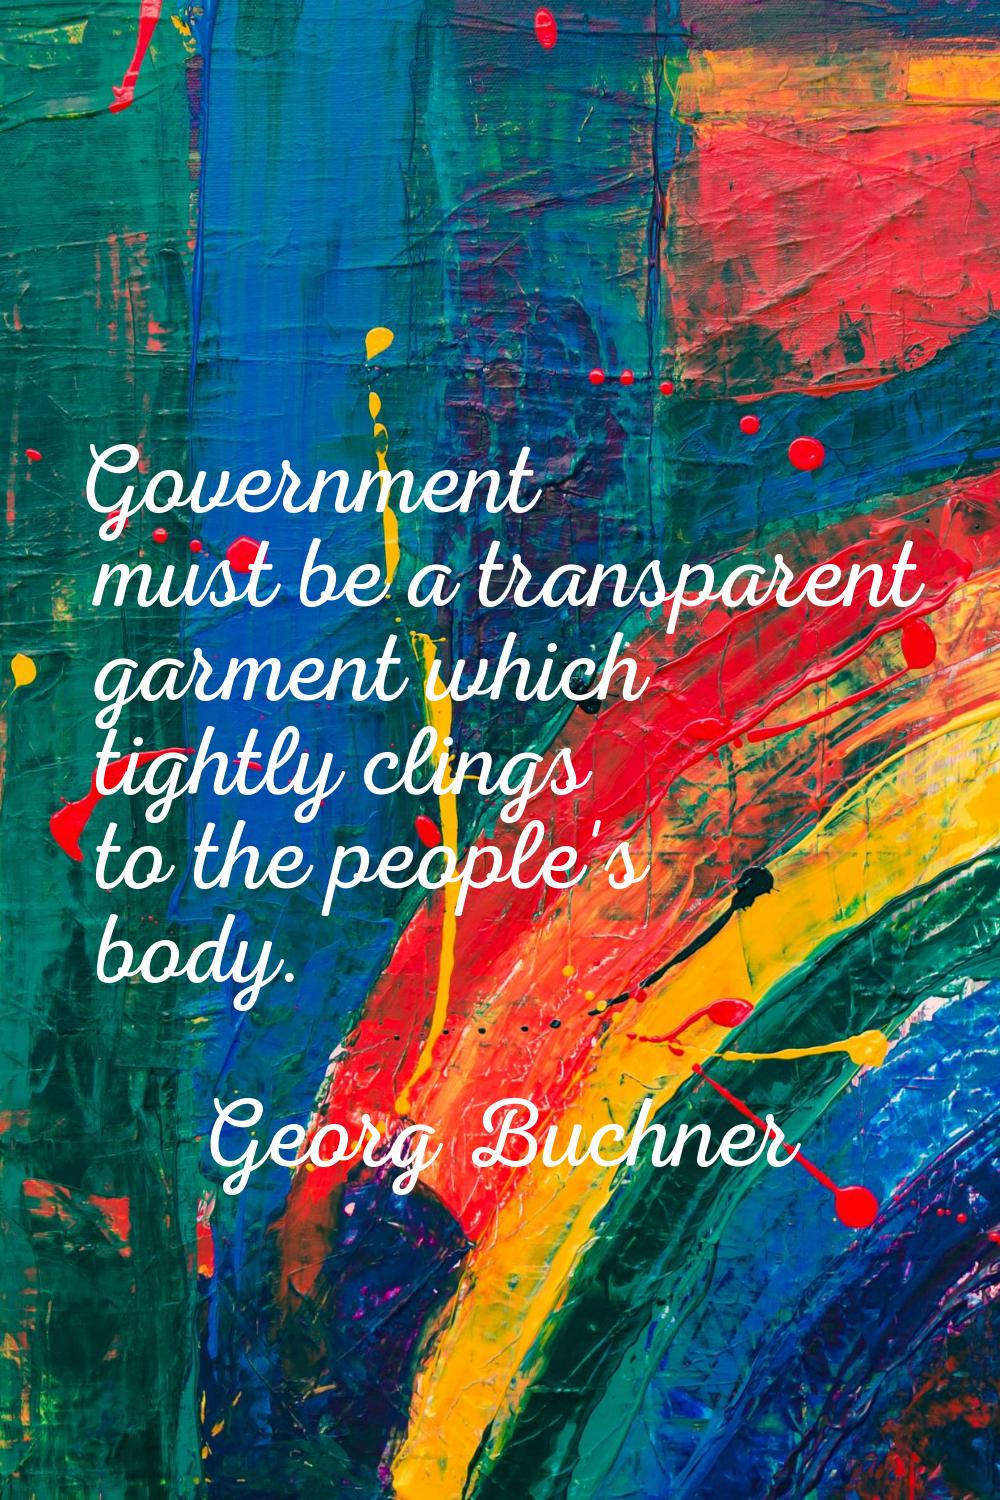 Government must be a transparent garment which tightly clings to the people's body.